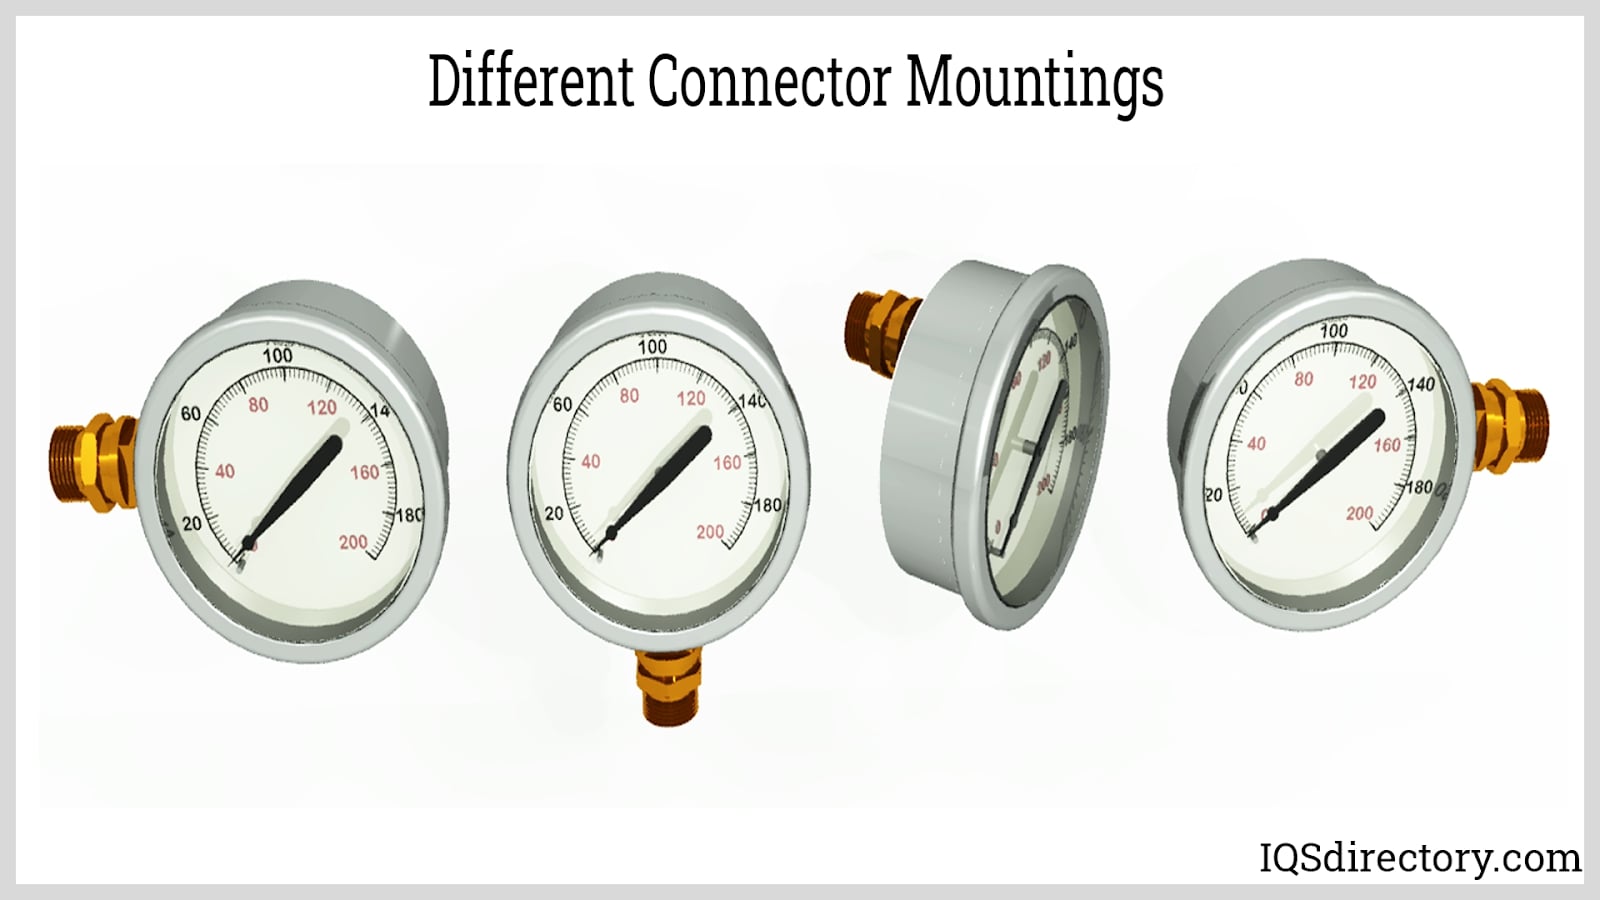 Different Connector Mountings